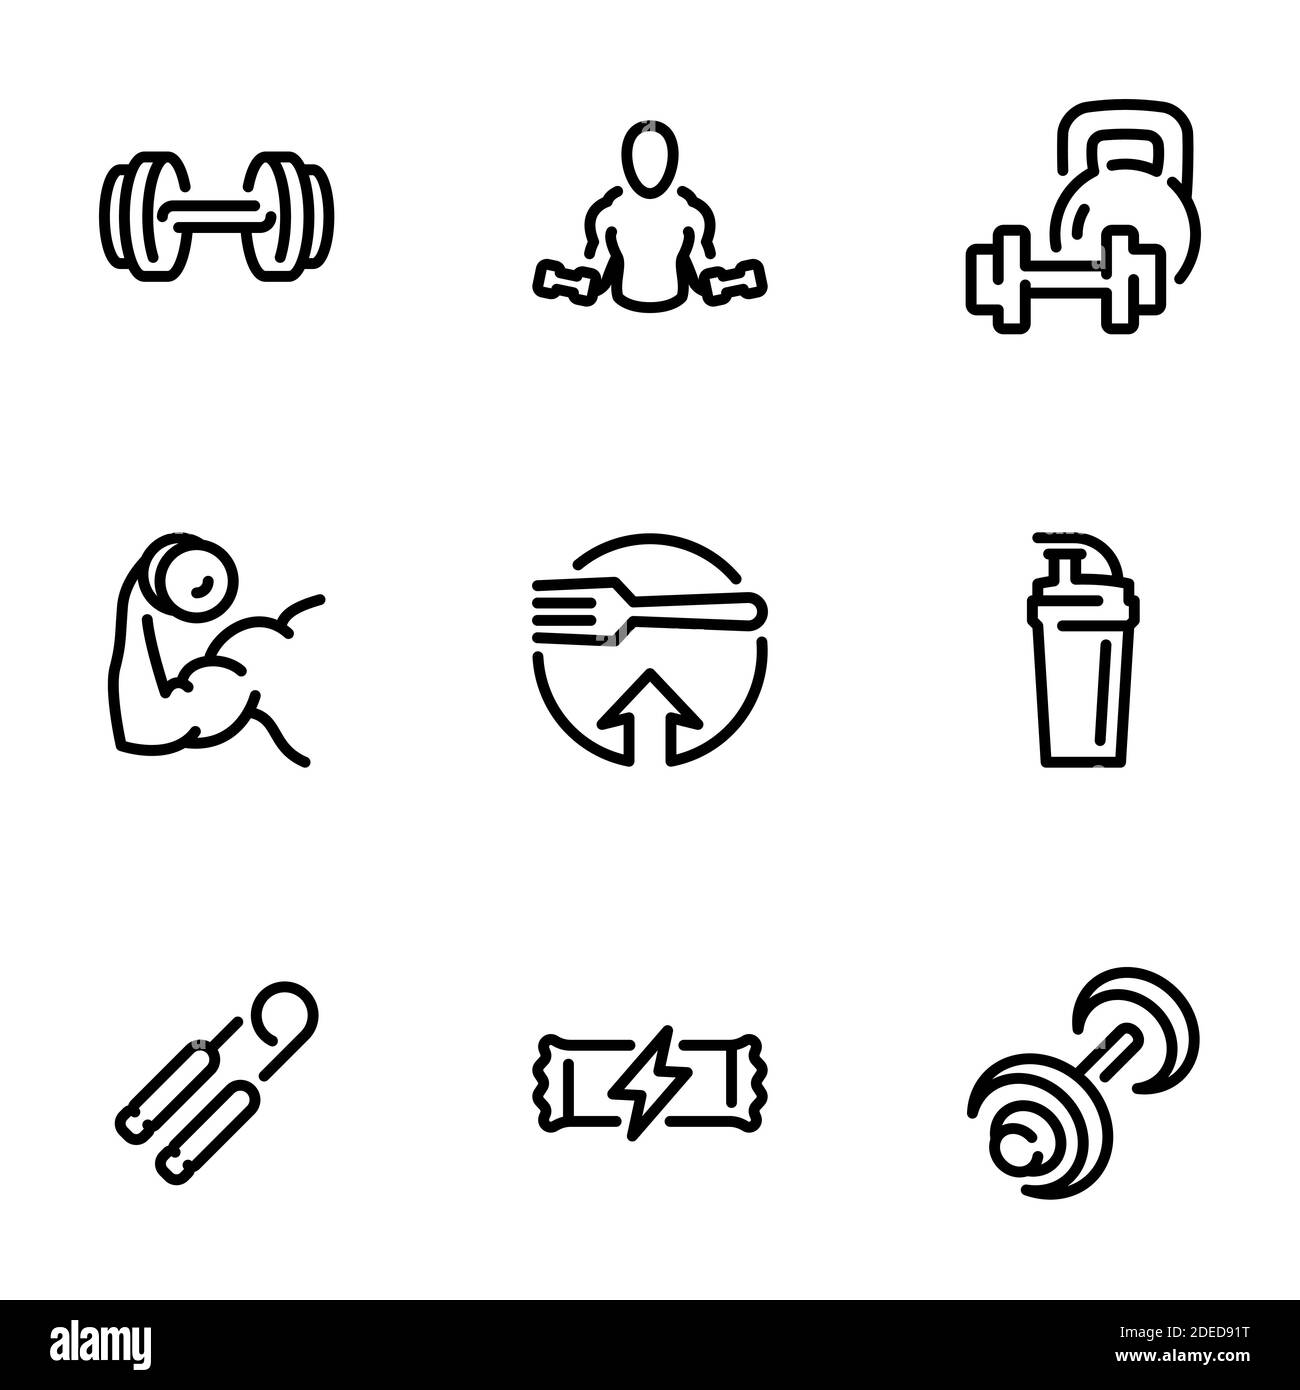 Set of black vector icons, isolated on white background, on theme Bodybuilding, fitness and sports nutrition Stock Vector